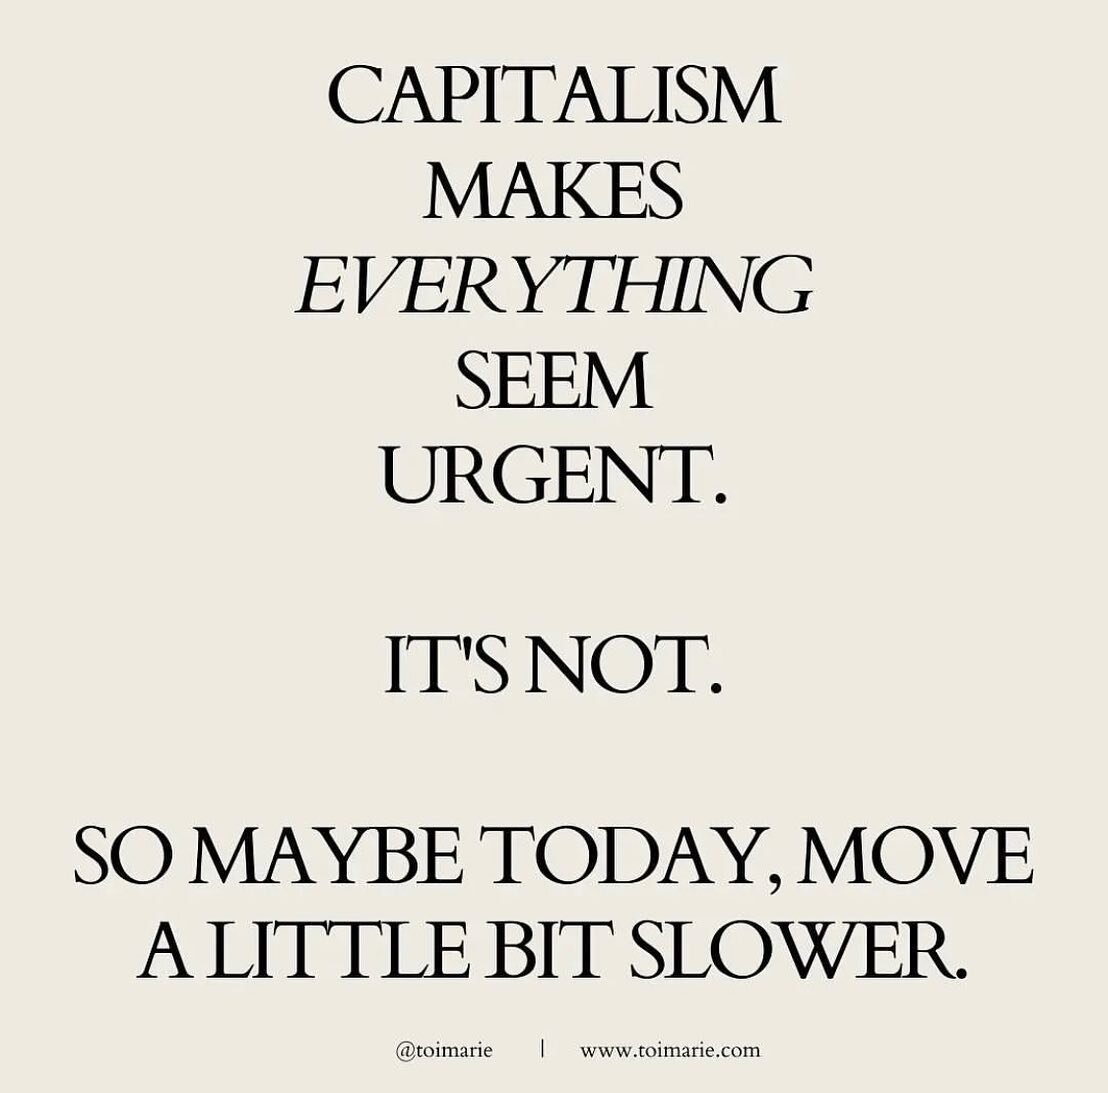 Take your time today and give yourself whatever you need. 🐌✨

Caring for ourselves and our communities will empower us for the long haul. And will disrupt the systems capitalism has built. There&rsquo;s nothing more revolutionary than caring and res